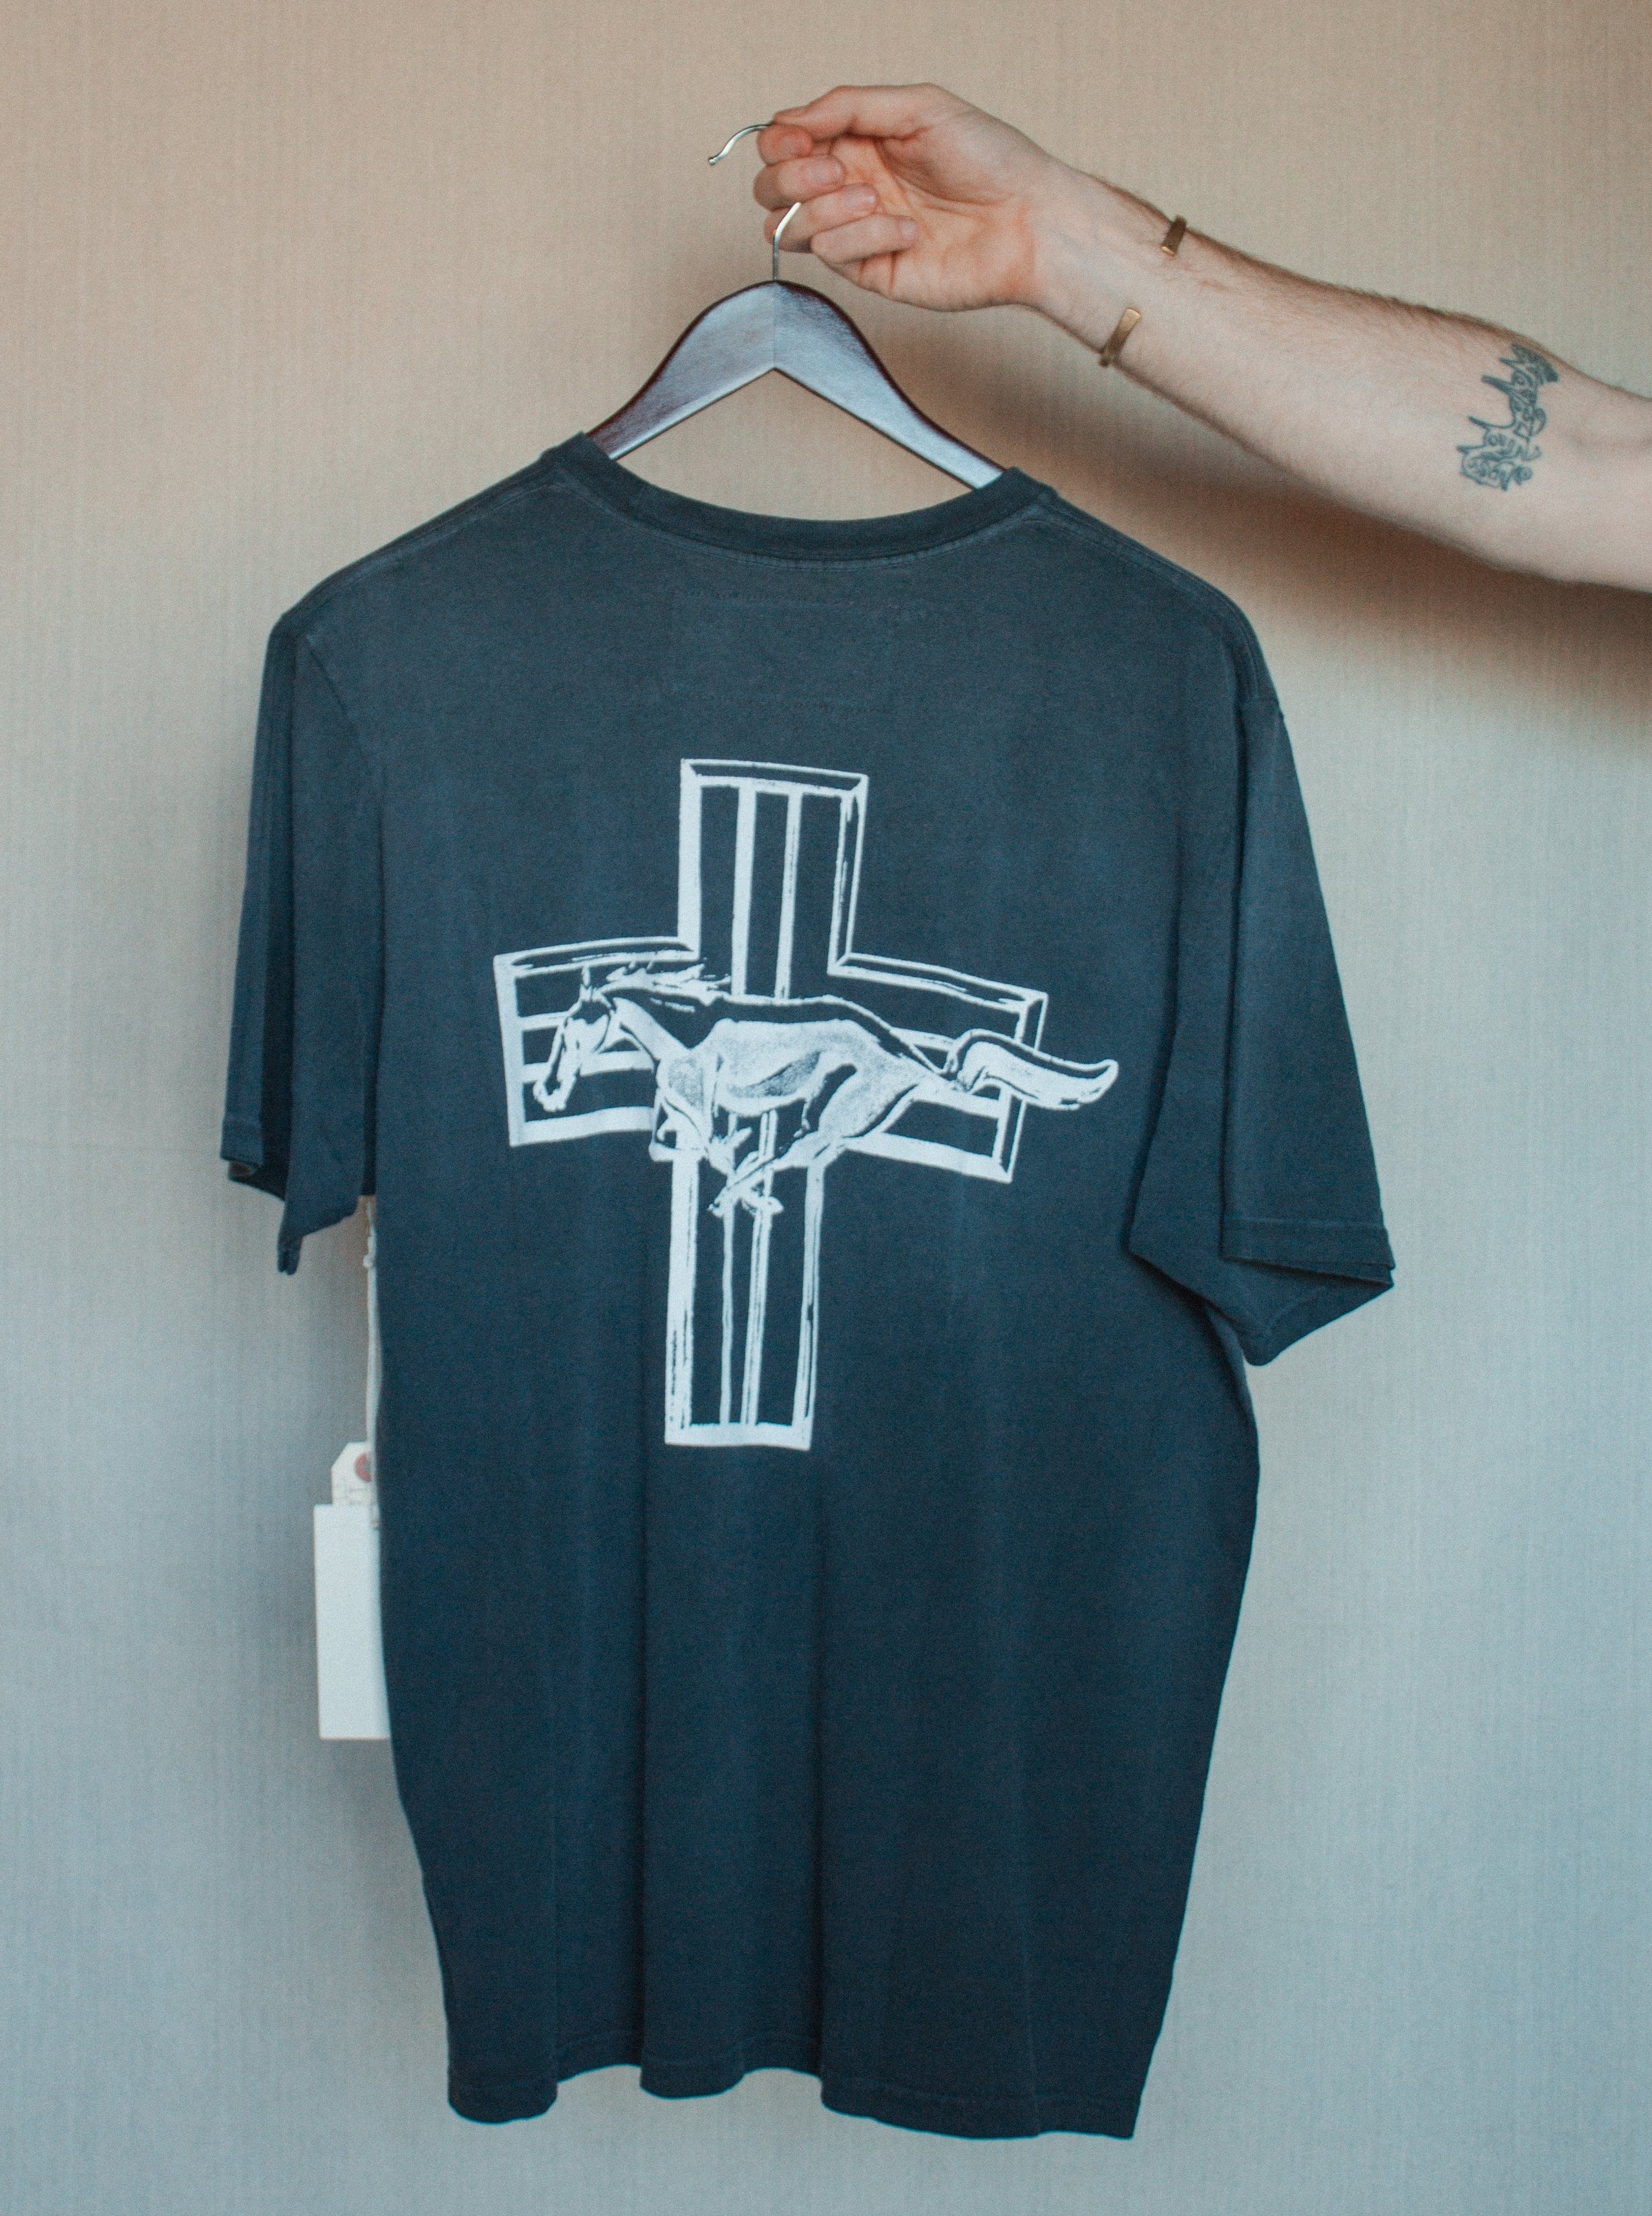 One of These Days -Mustang Cross Tee Black